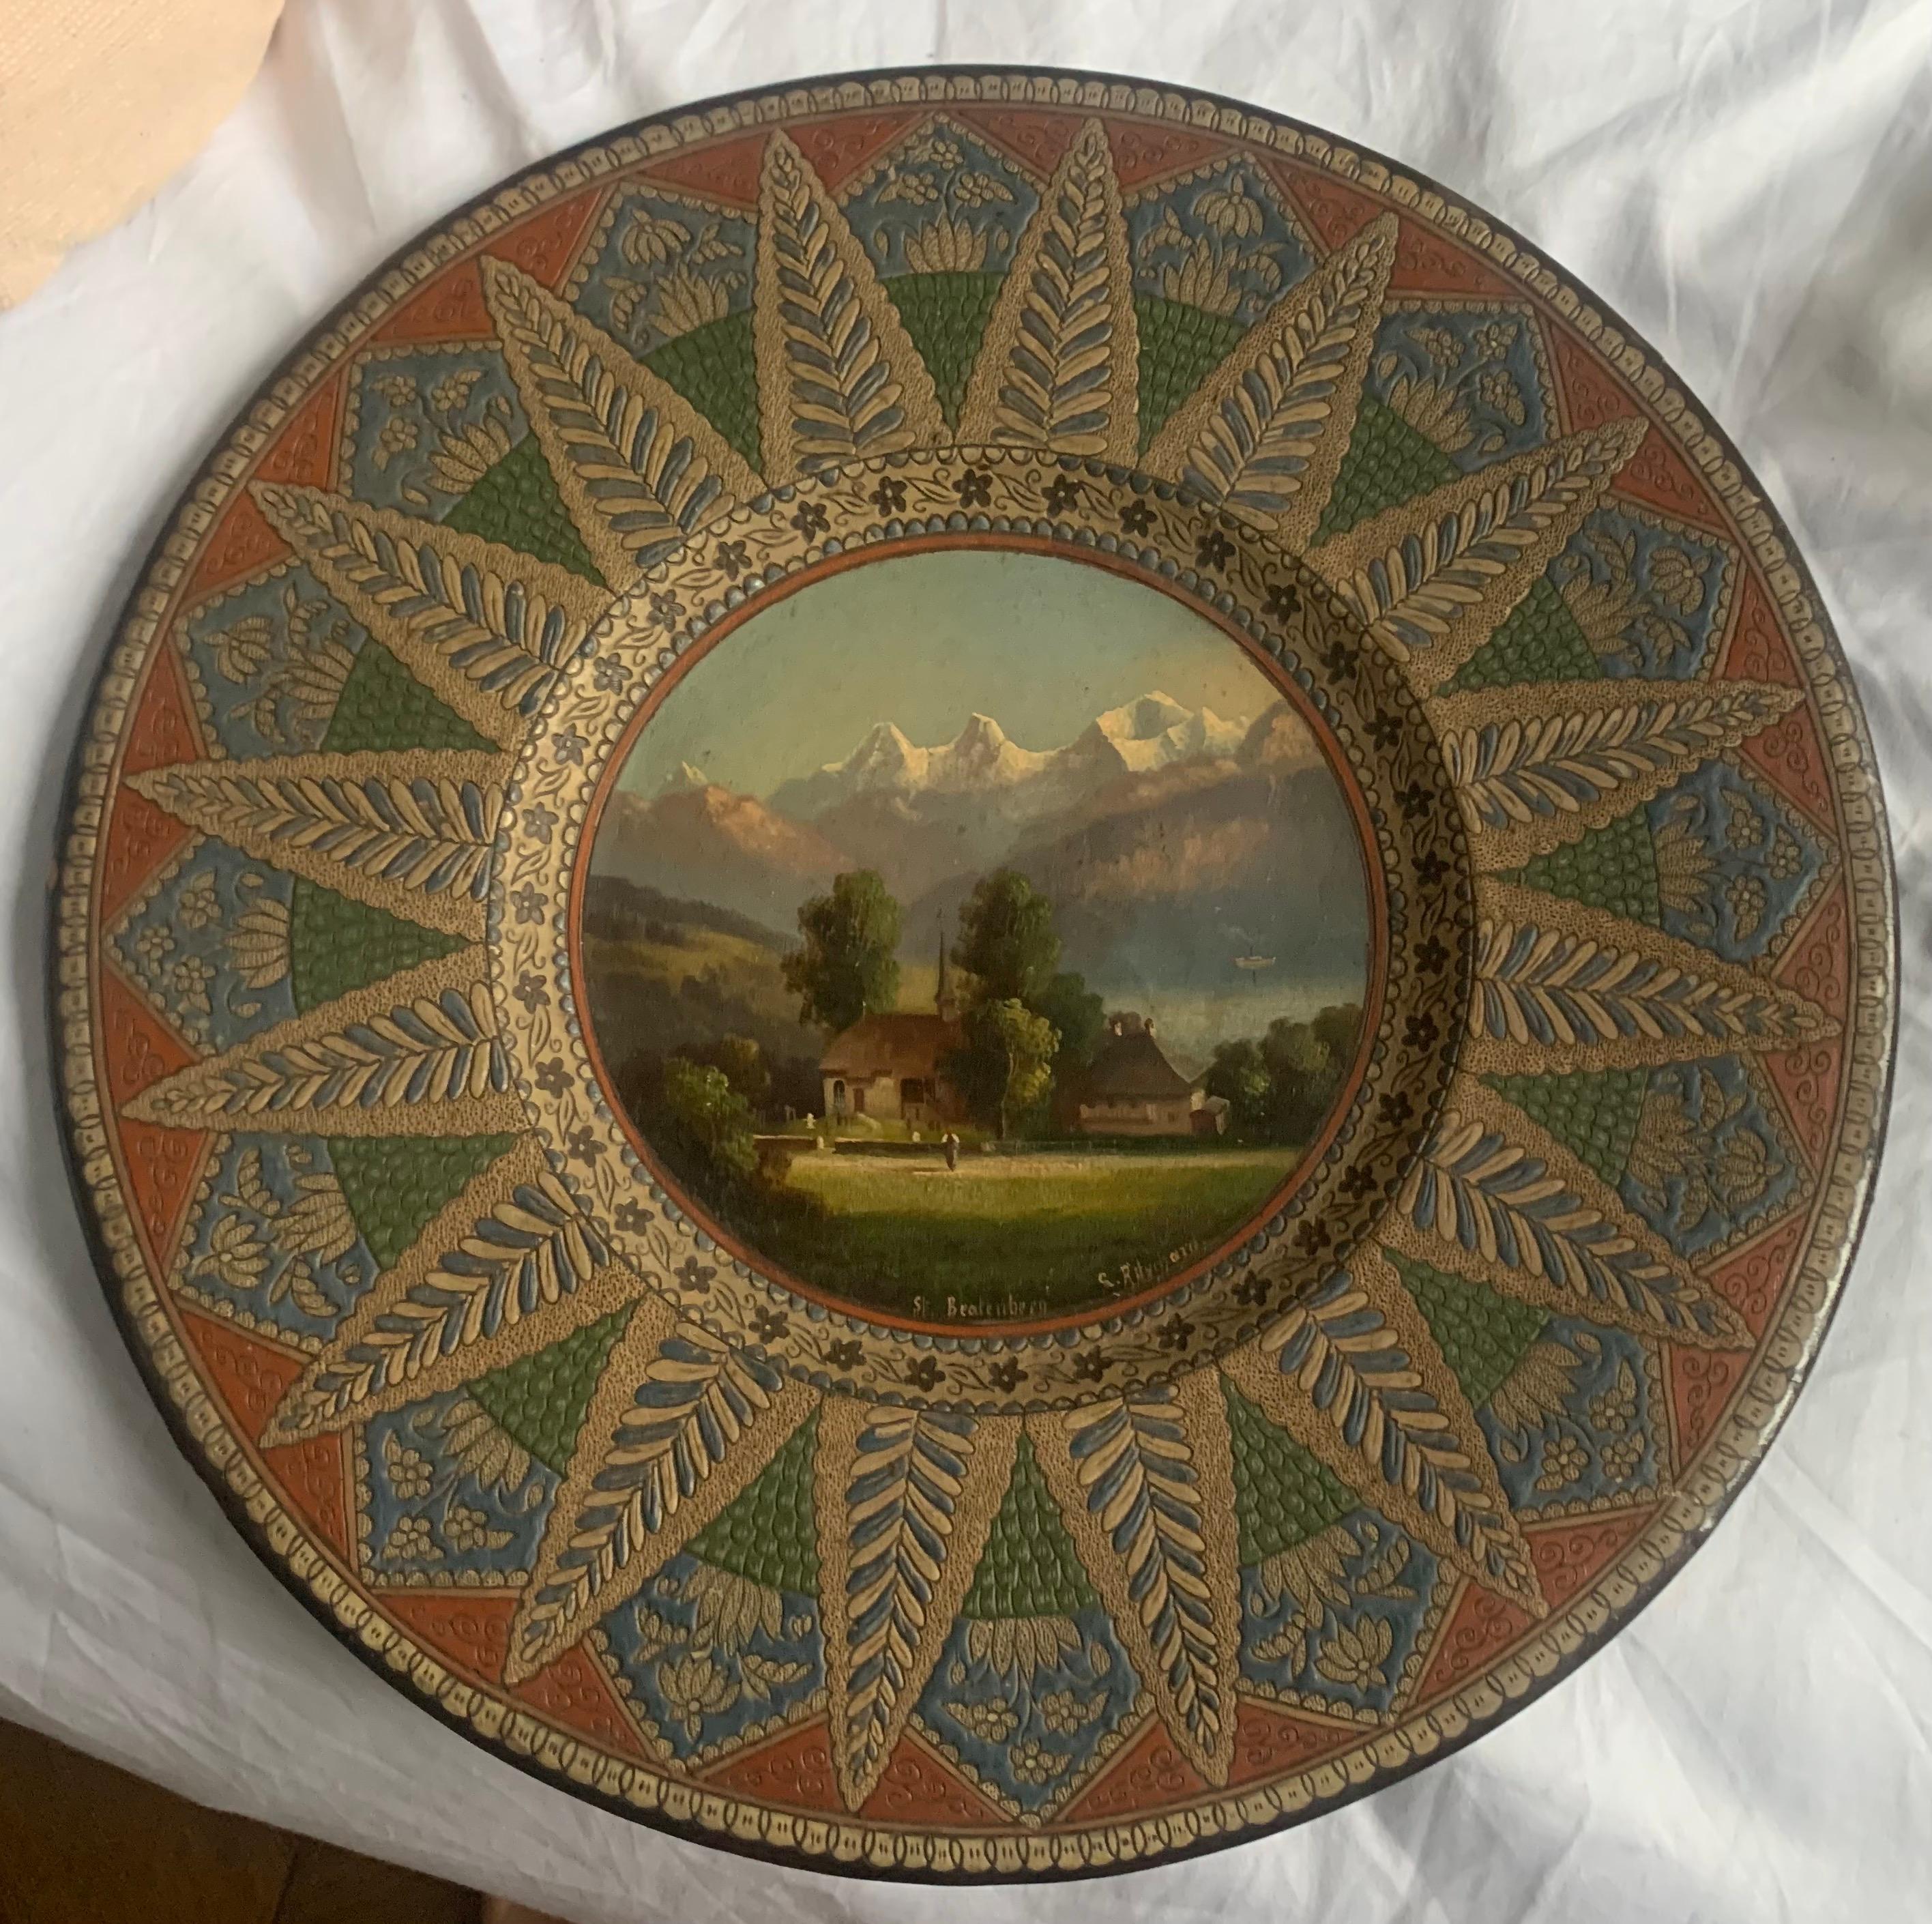 A circa 1890s, Swiss late 19th century, Thoune plate of St. Beatenburg and painted by Louis Ritschard (French 1817 - 1904). A beautifully painted, in miniature, of a lakeside scenery with a small boat on the lake. The picture is surrounded by an